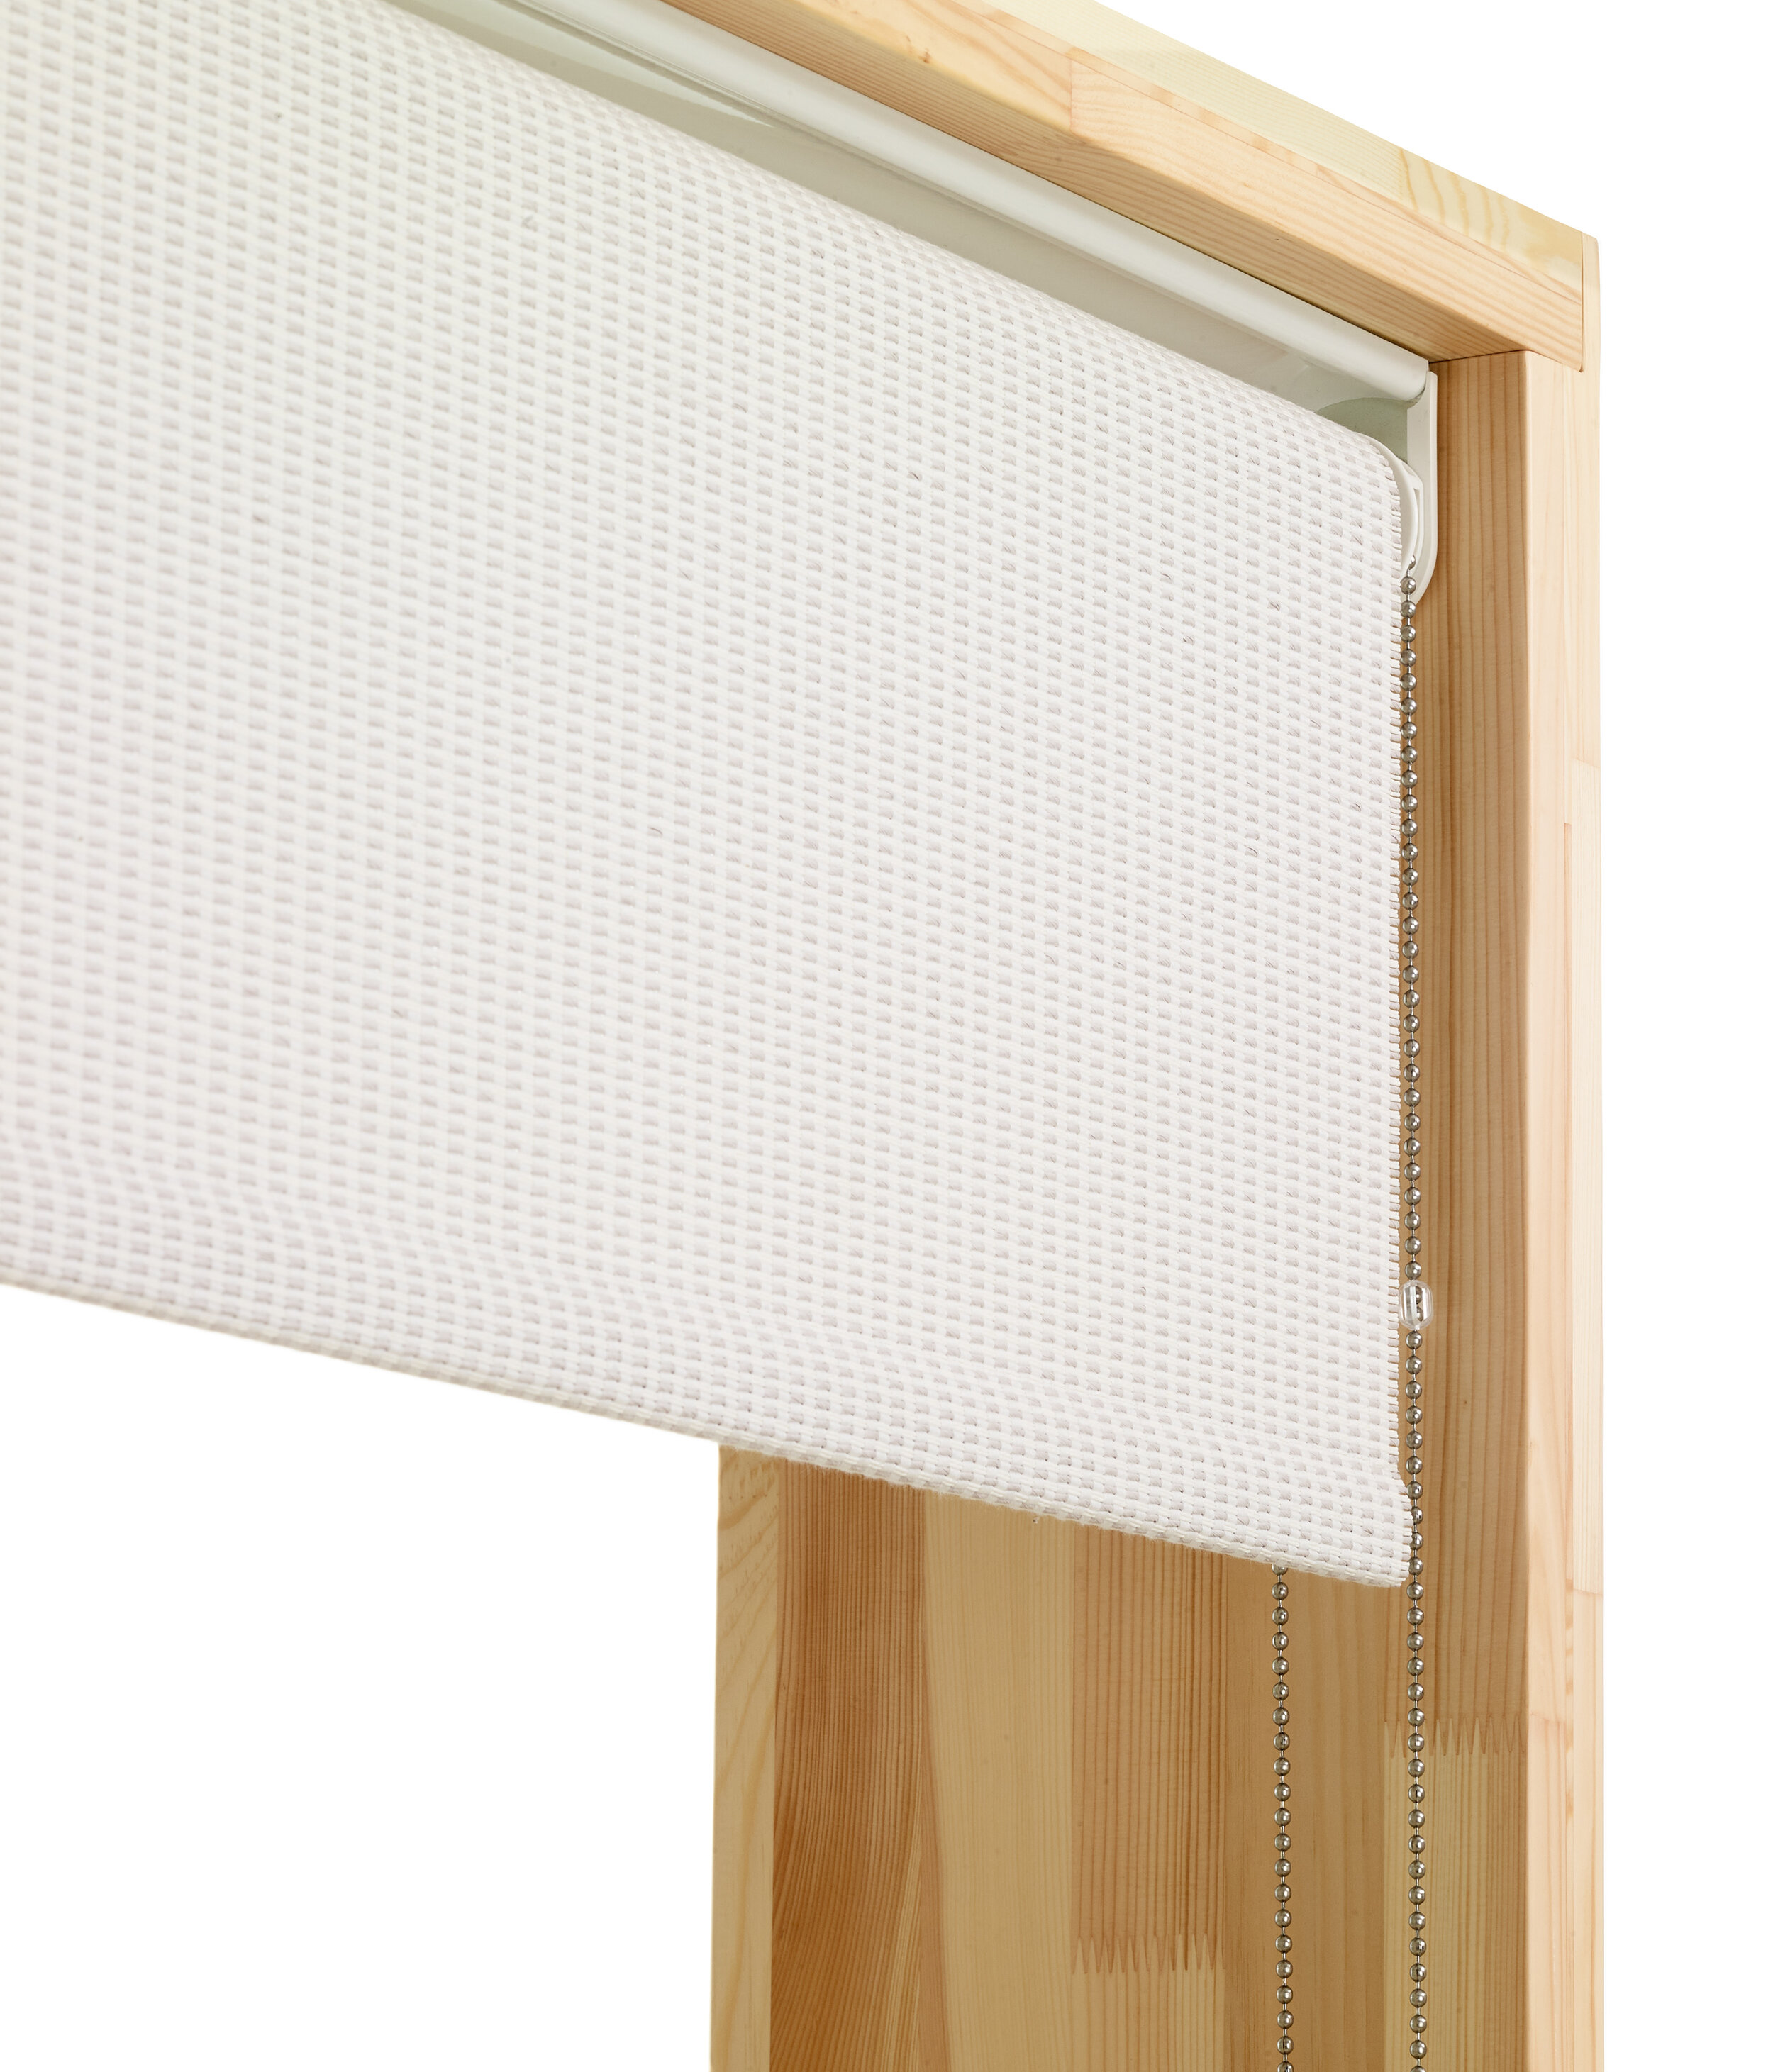 D mechanism_Roller blind with chain operated_front winding_Morning